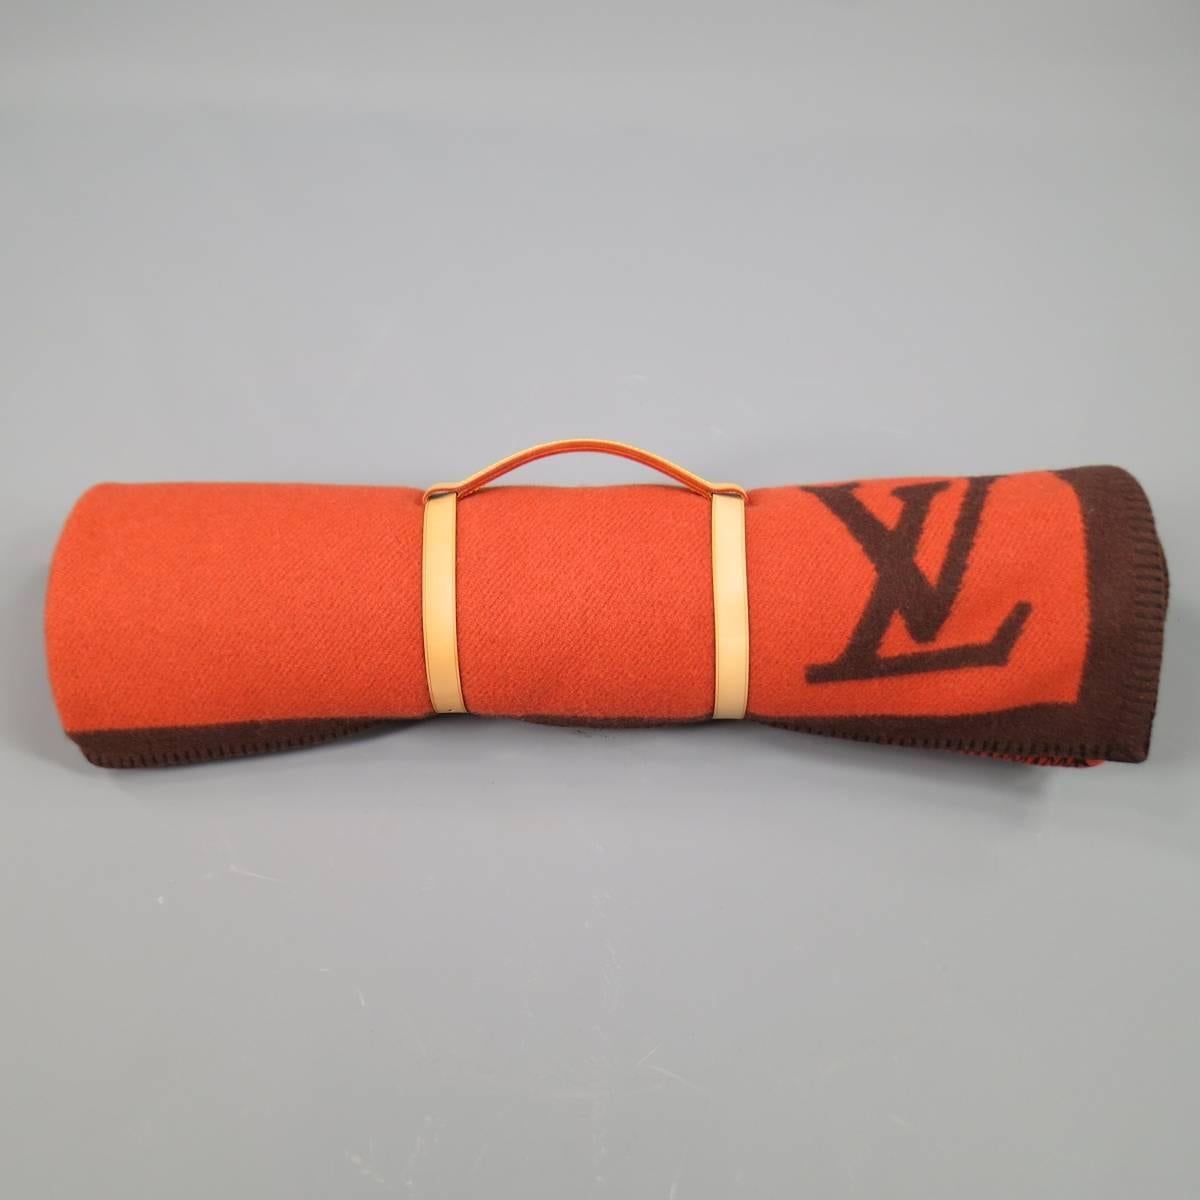 LOUIS VUITTON Karakoram Blanket scarf in a soft structured bold orange thick wool cashmere blend fabric with brown print throughout and embossed vachetta leather harness. Minor wear on harness. Made in Scotland
 
Excellent Pre-Owned Condition.
 
68